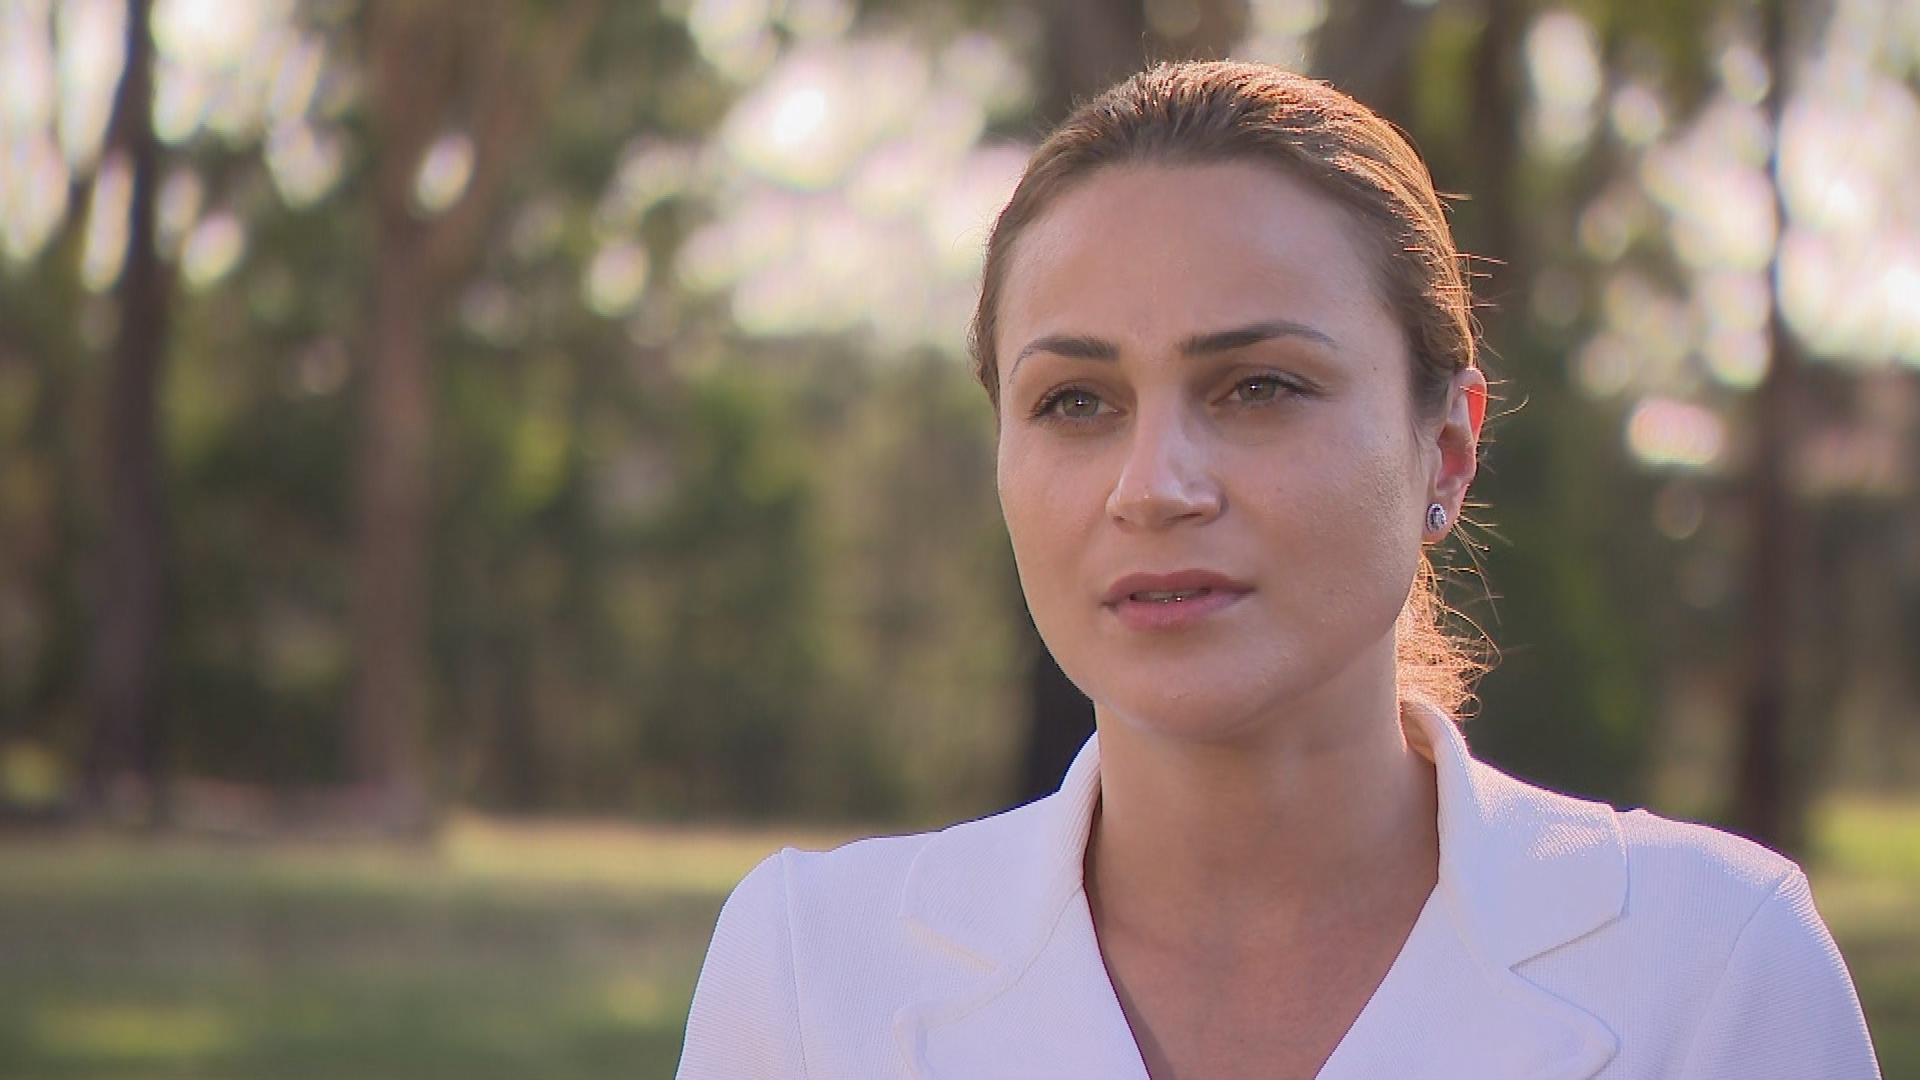 Liberal candidate Tina Ayyad has been the target of racist smear campaign ahead of the NSW election.